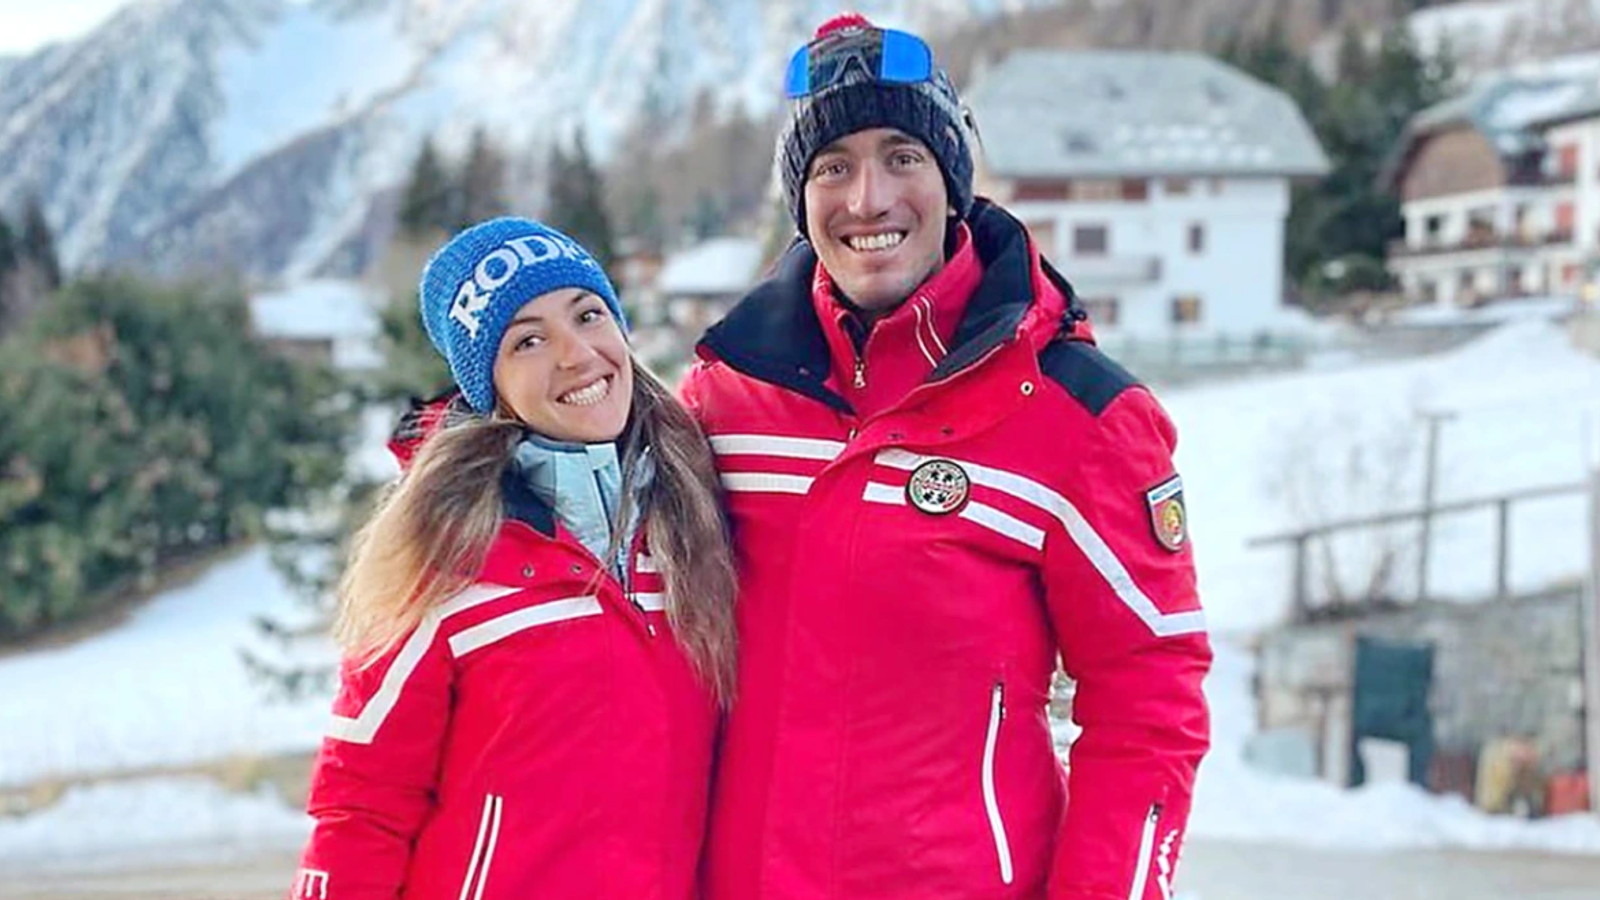 Tragic accident claims the lives of World Cup skier Jean Daniel Pession and his girlfriend on Italian mountain | World News